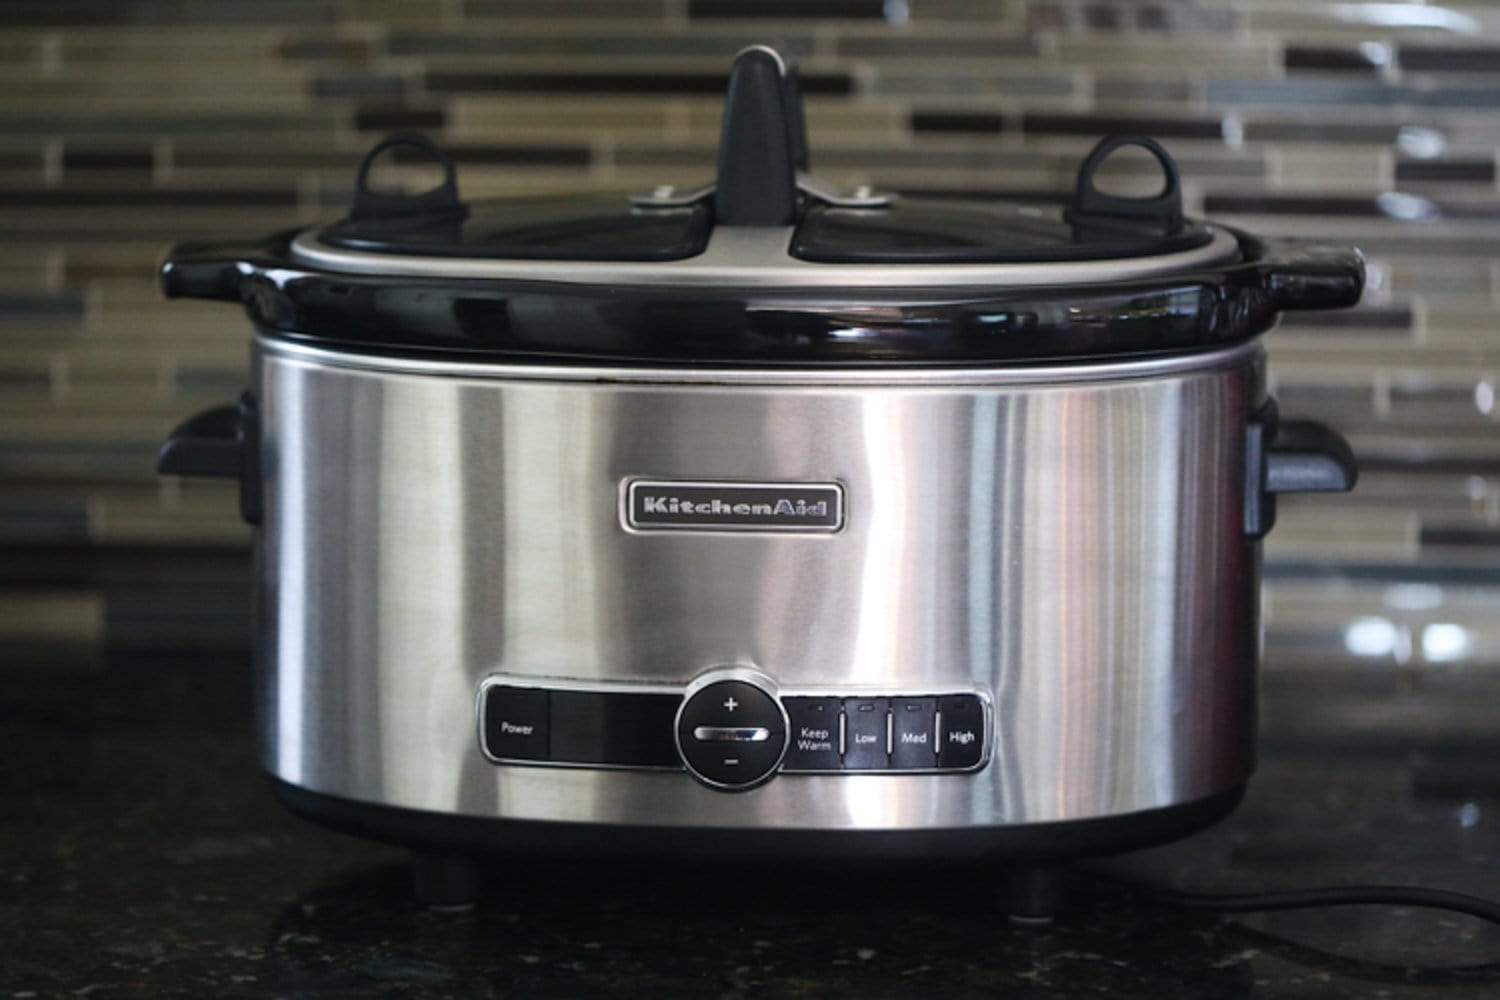 A silver slow cooker on a kitchen counter